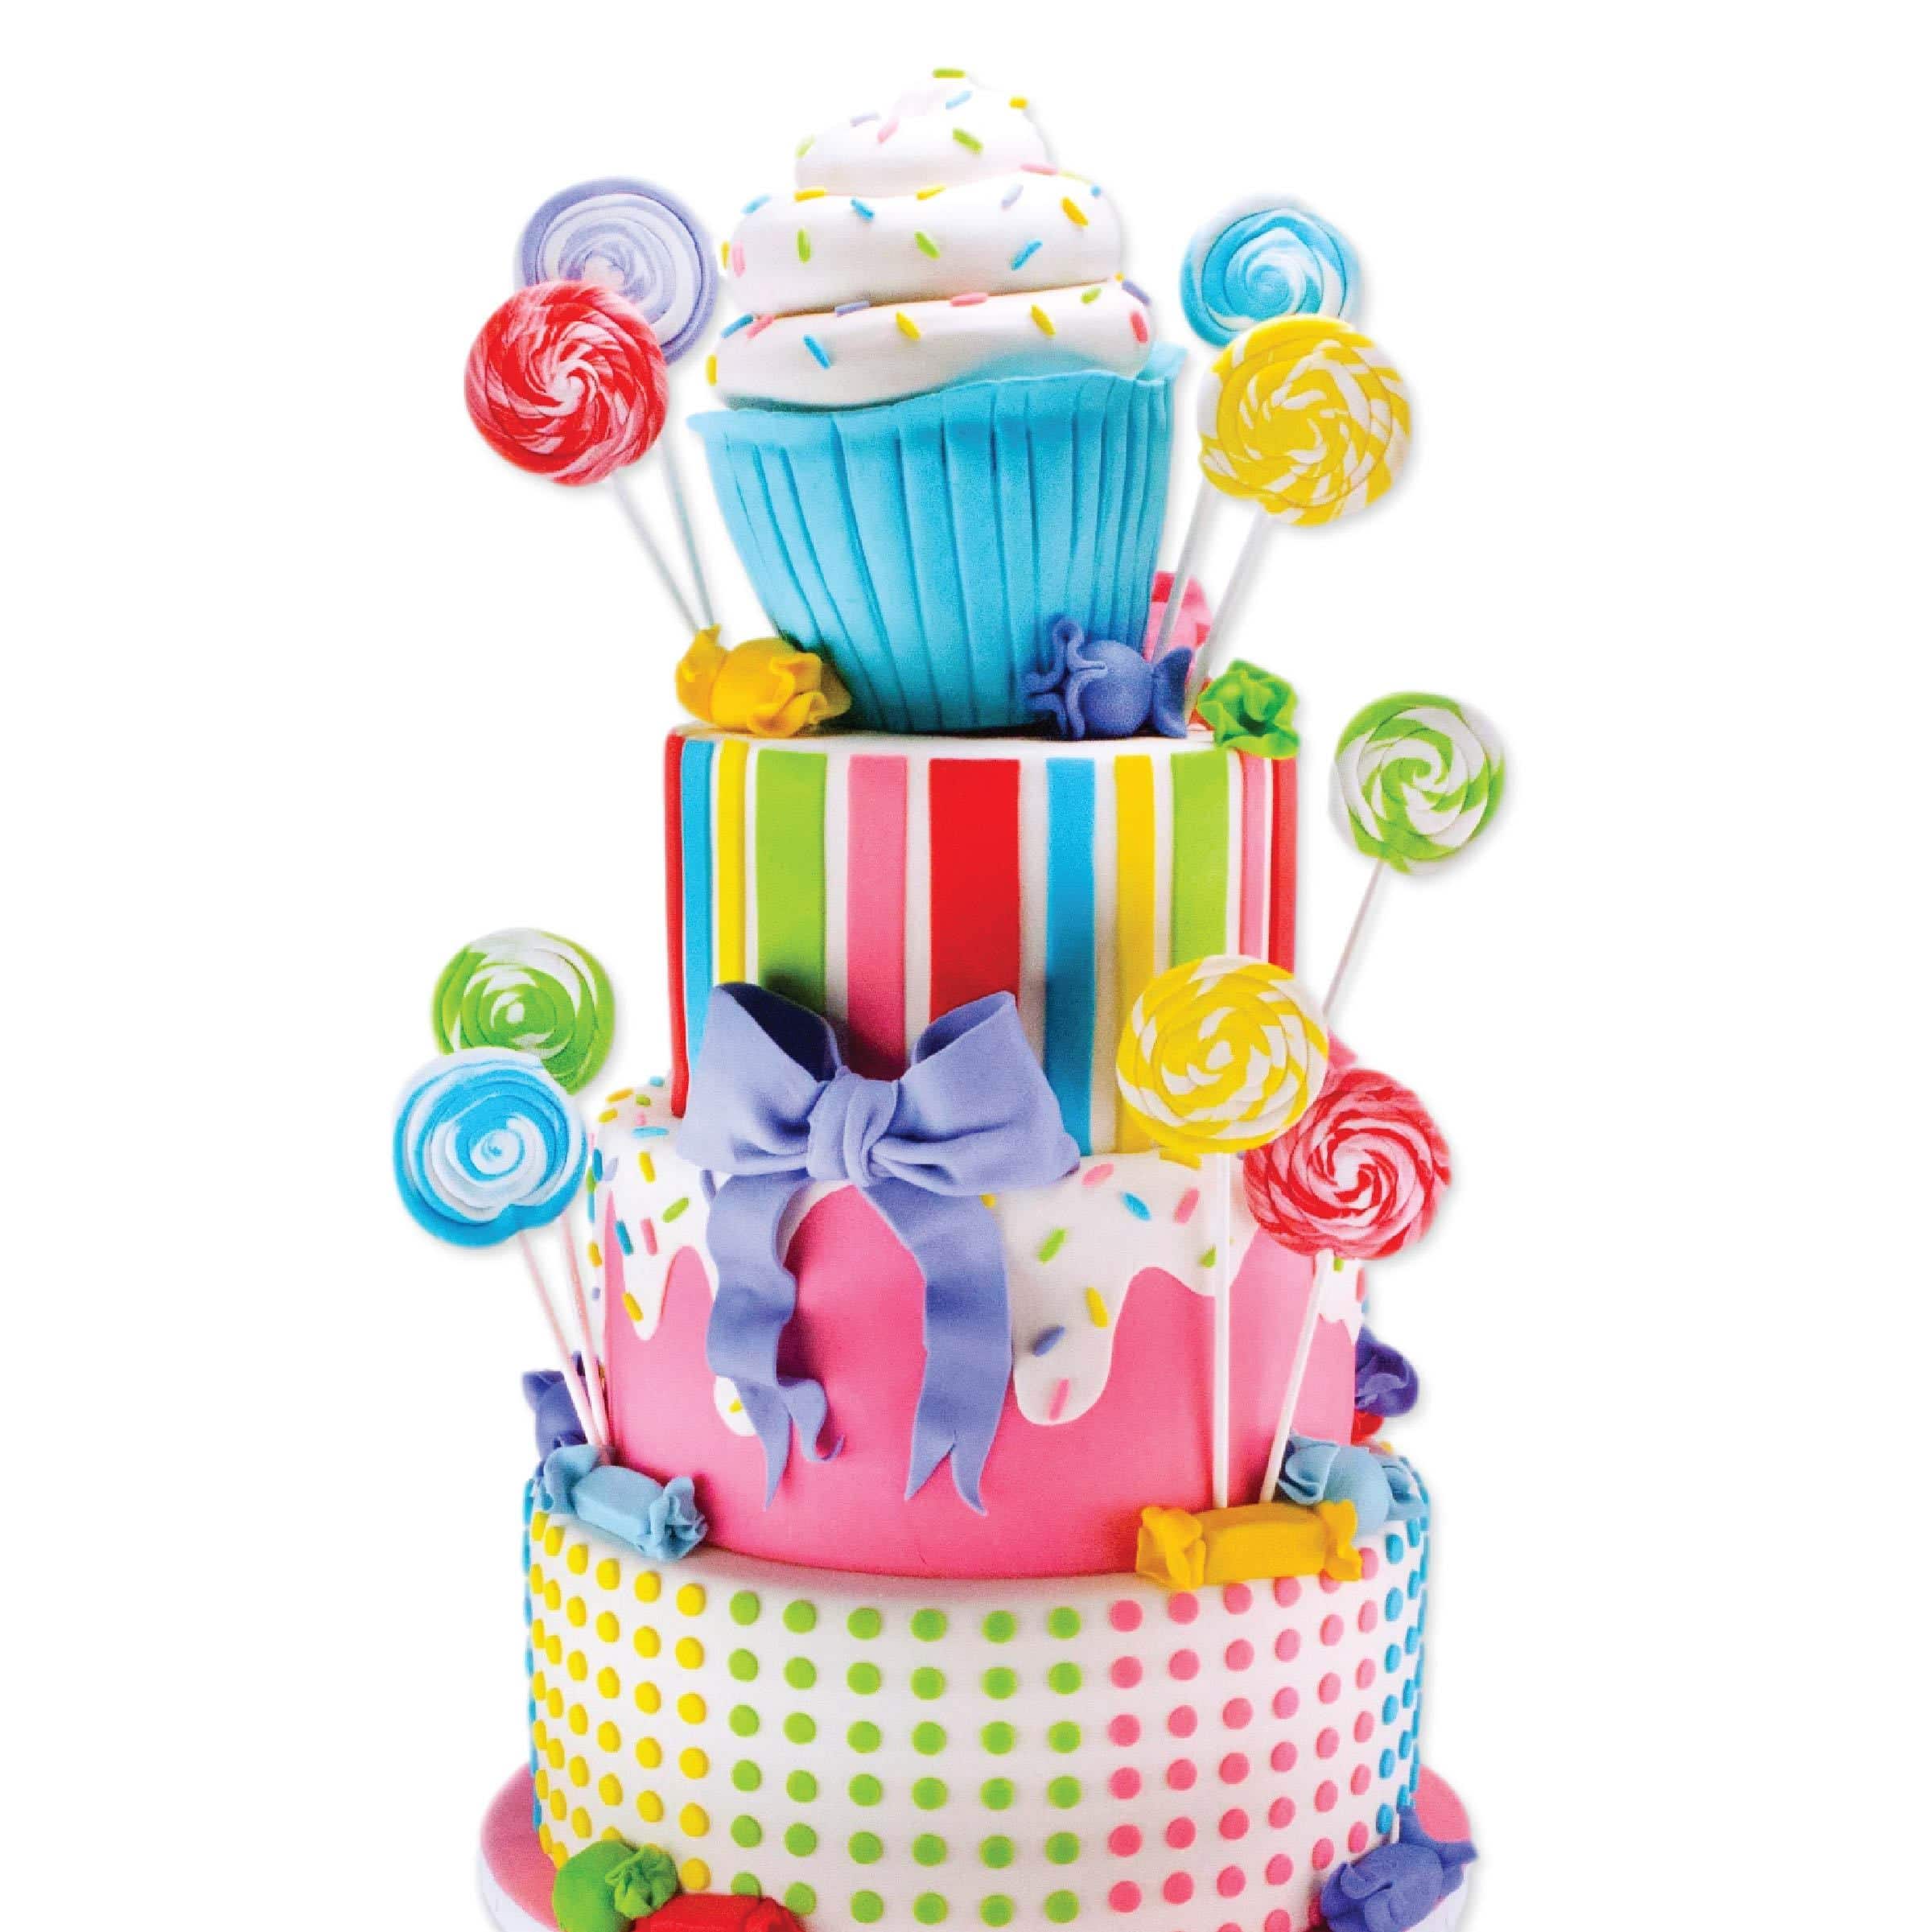 candyland cakes